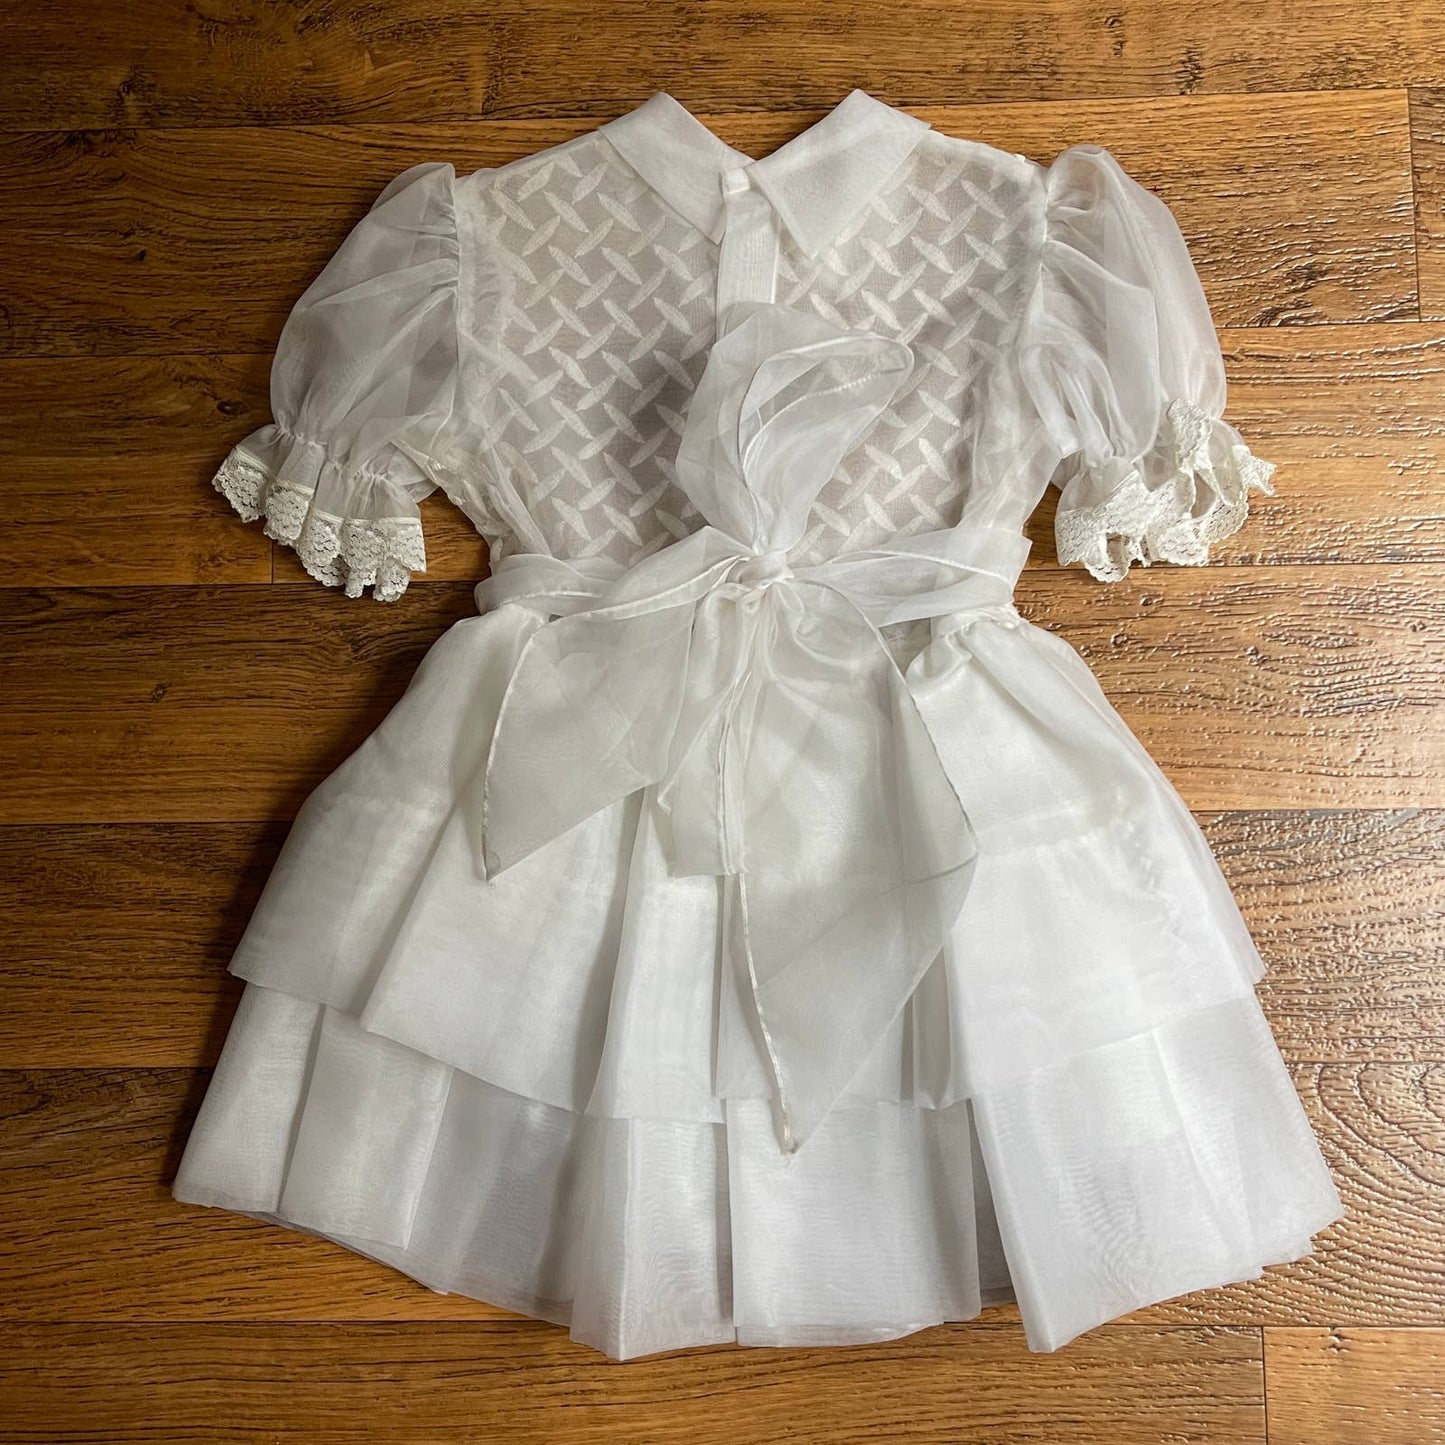 Vintage 50s Puff Sleeve Dress Kids White Sheer Embroidered Bodice Size 5 6